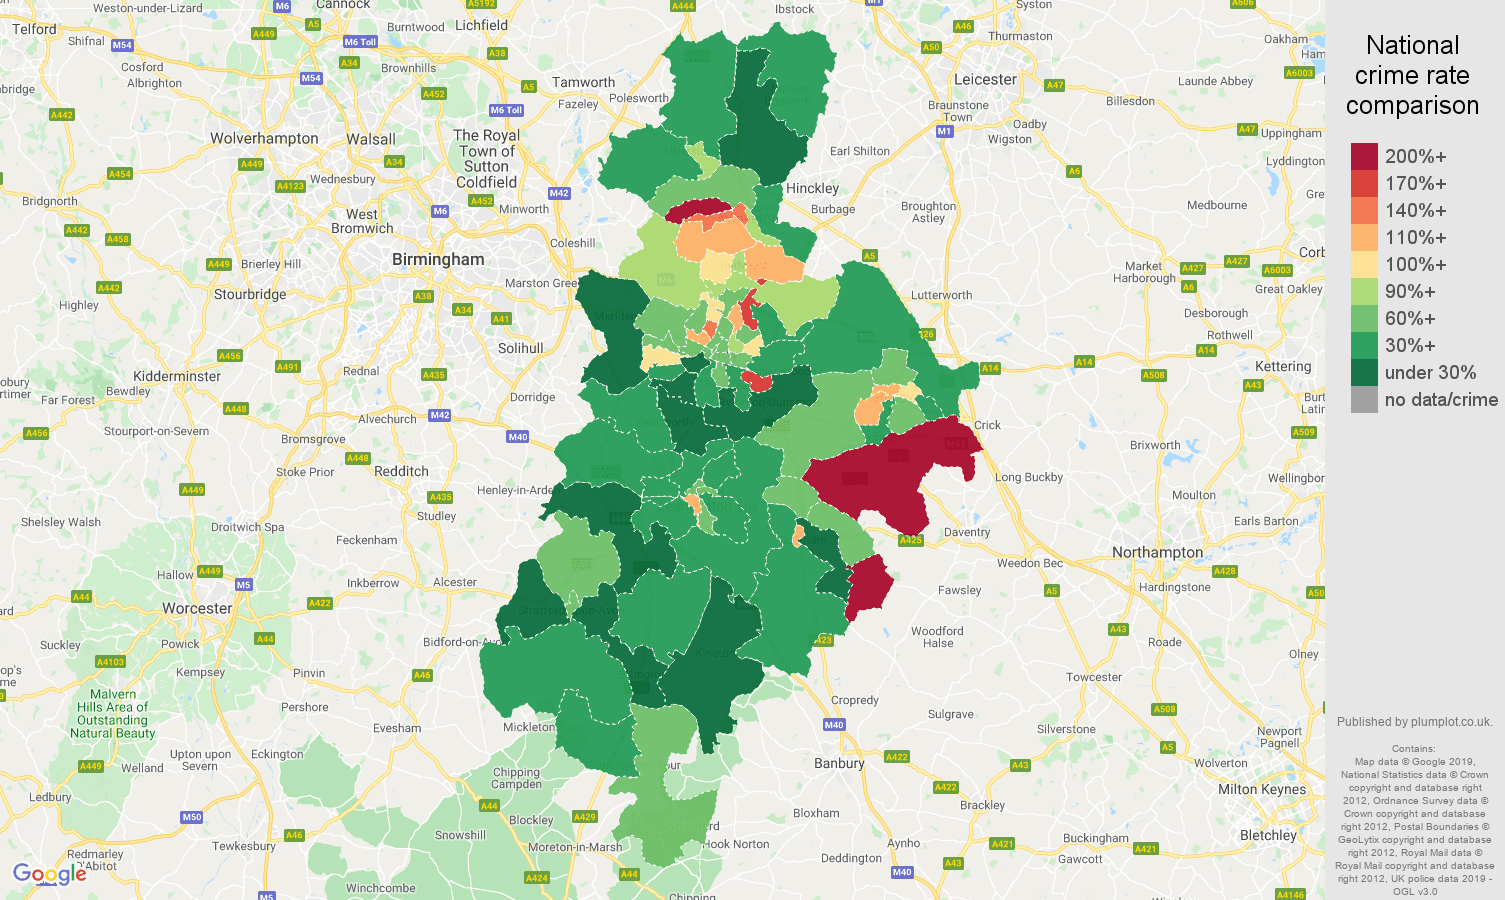 Coventry other crime rate comparison map